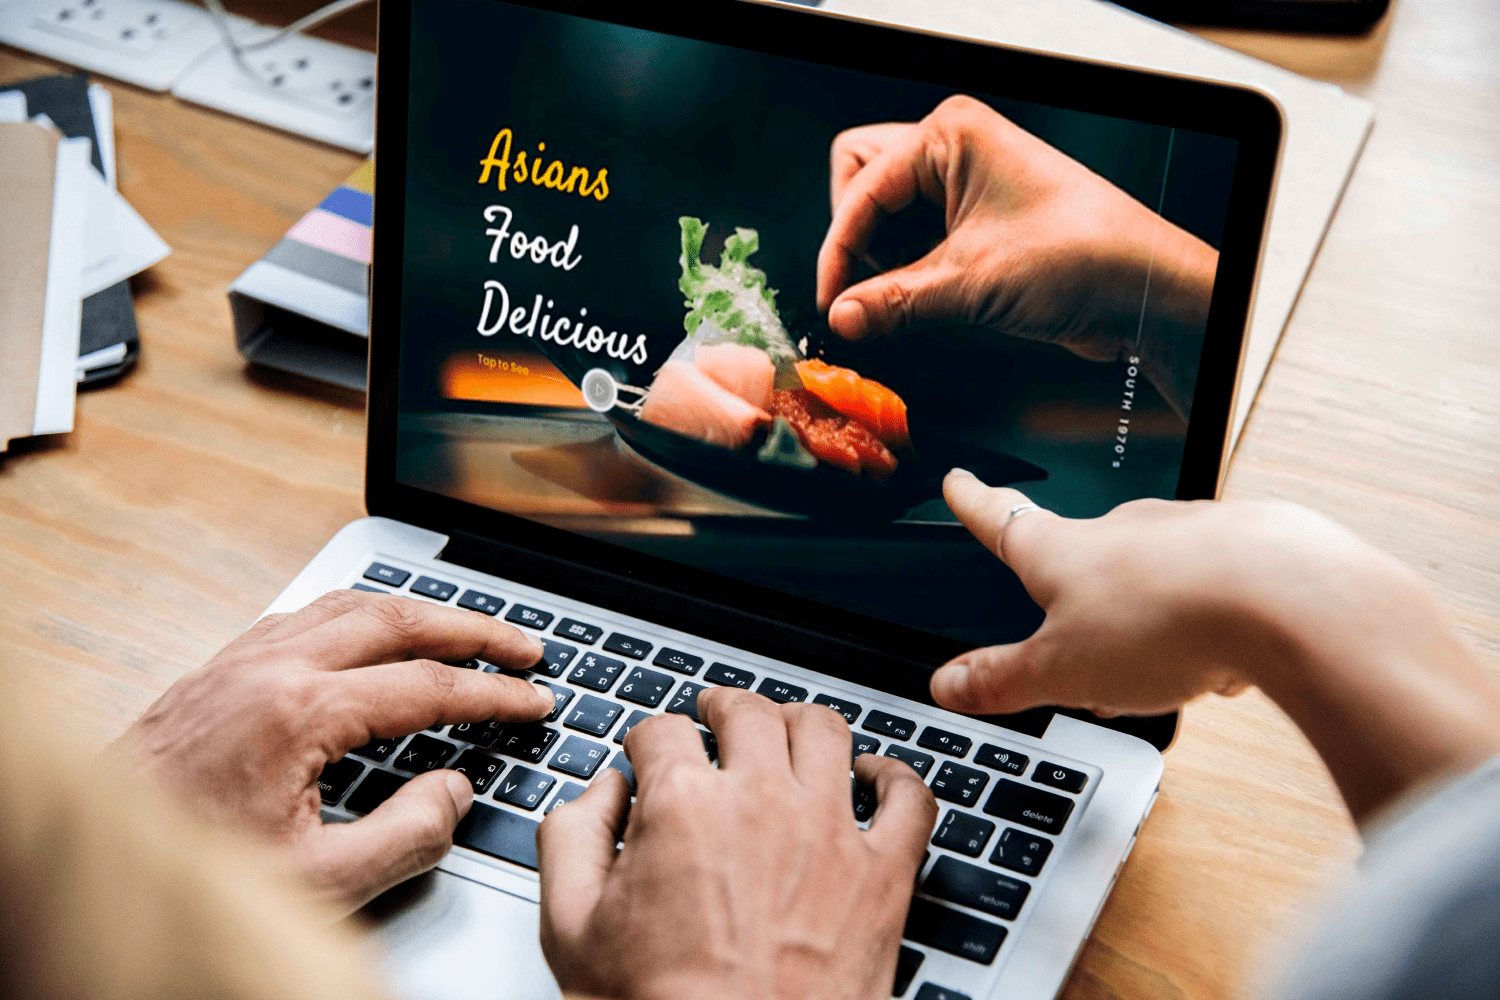 Asians Food - Food PowerPoint by MasterBundles notebook preview mockup image.